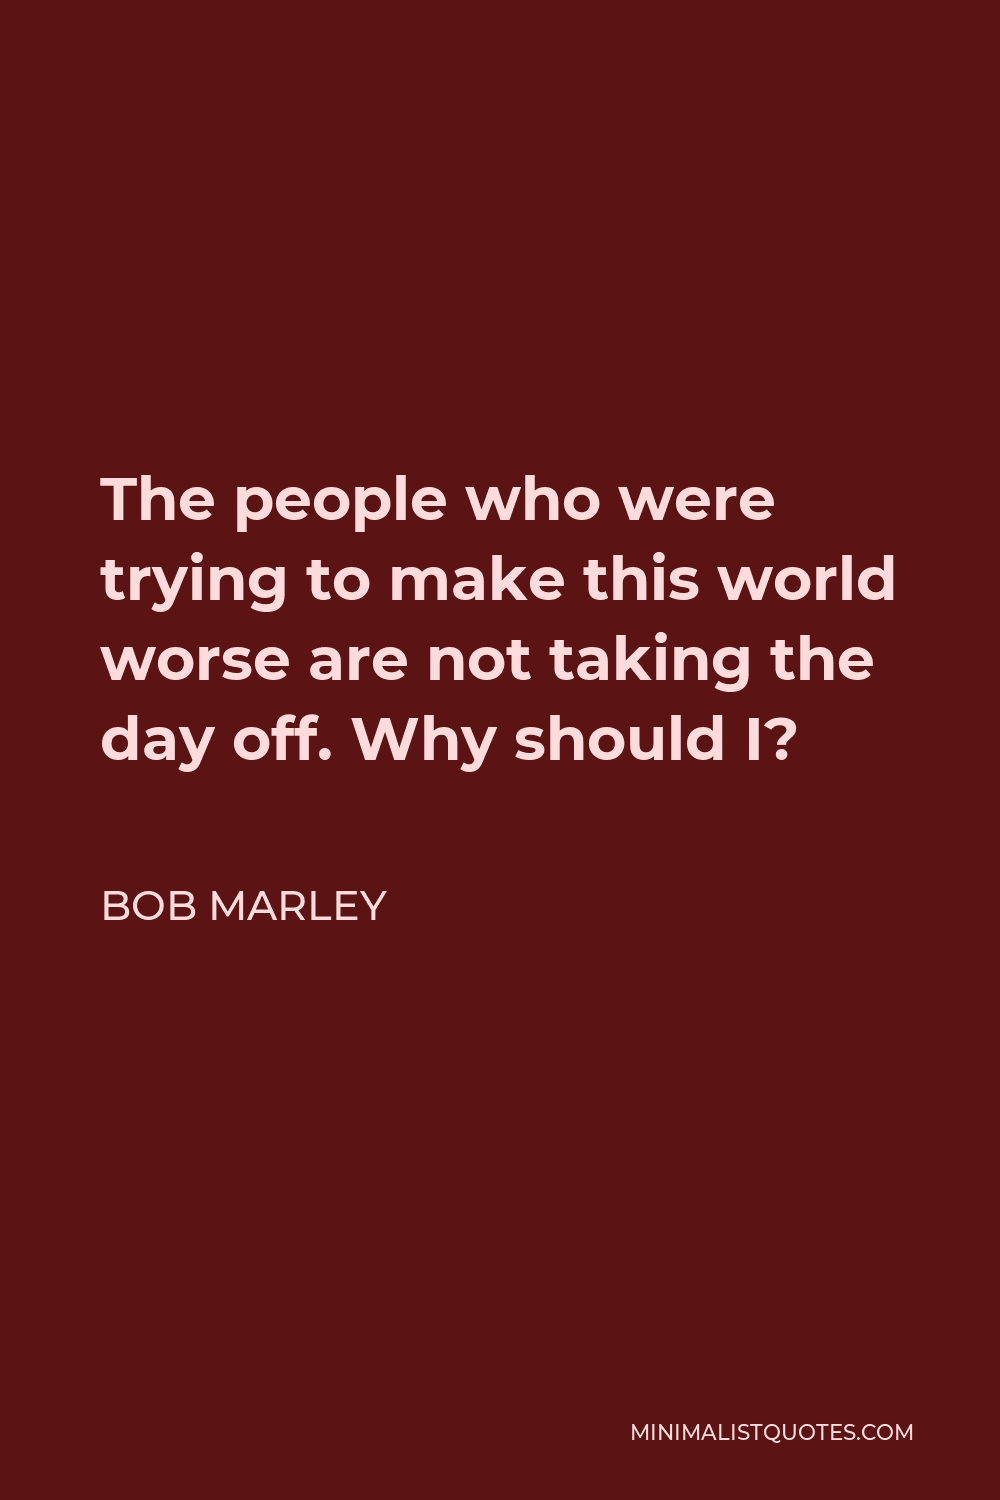 Bob Marley Quote - The people who were trying to make this world worse are not taking the day off. Why should I?